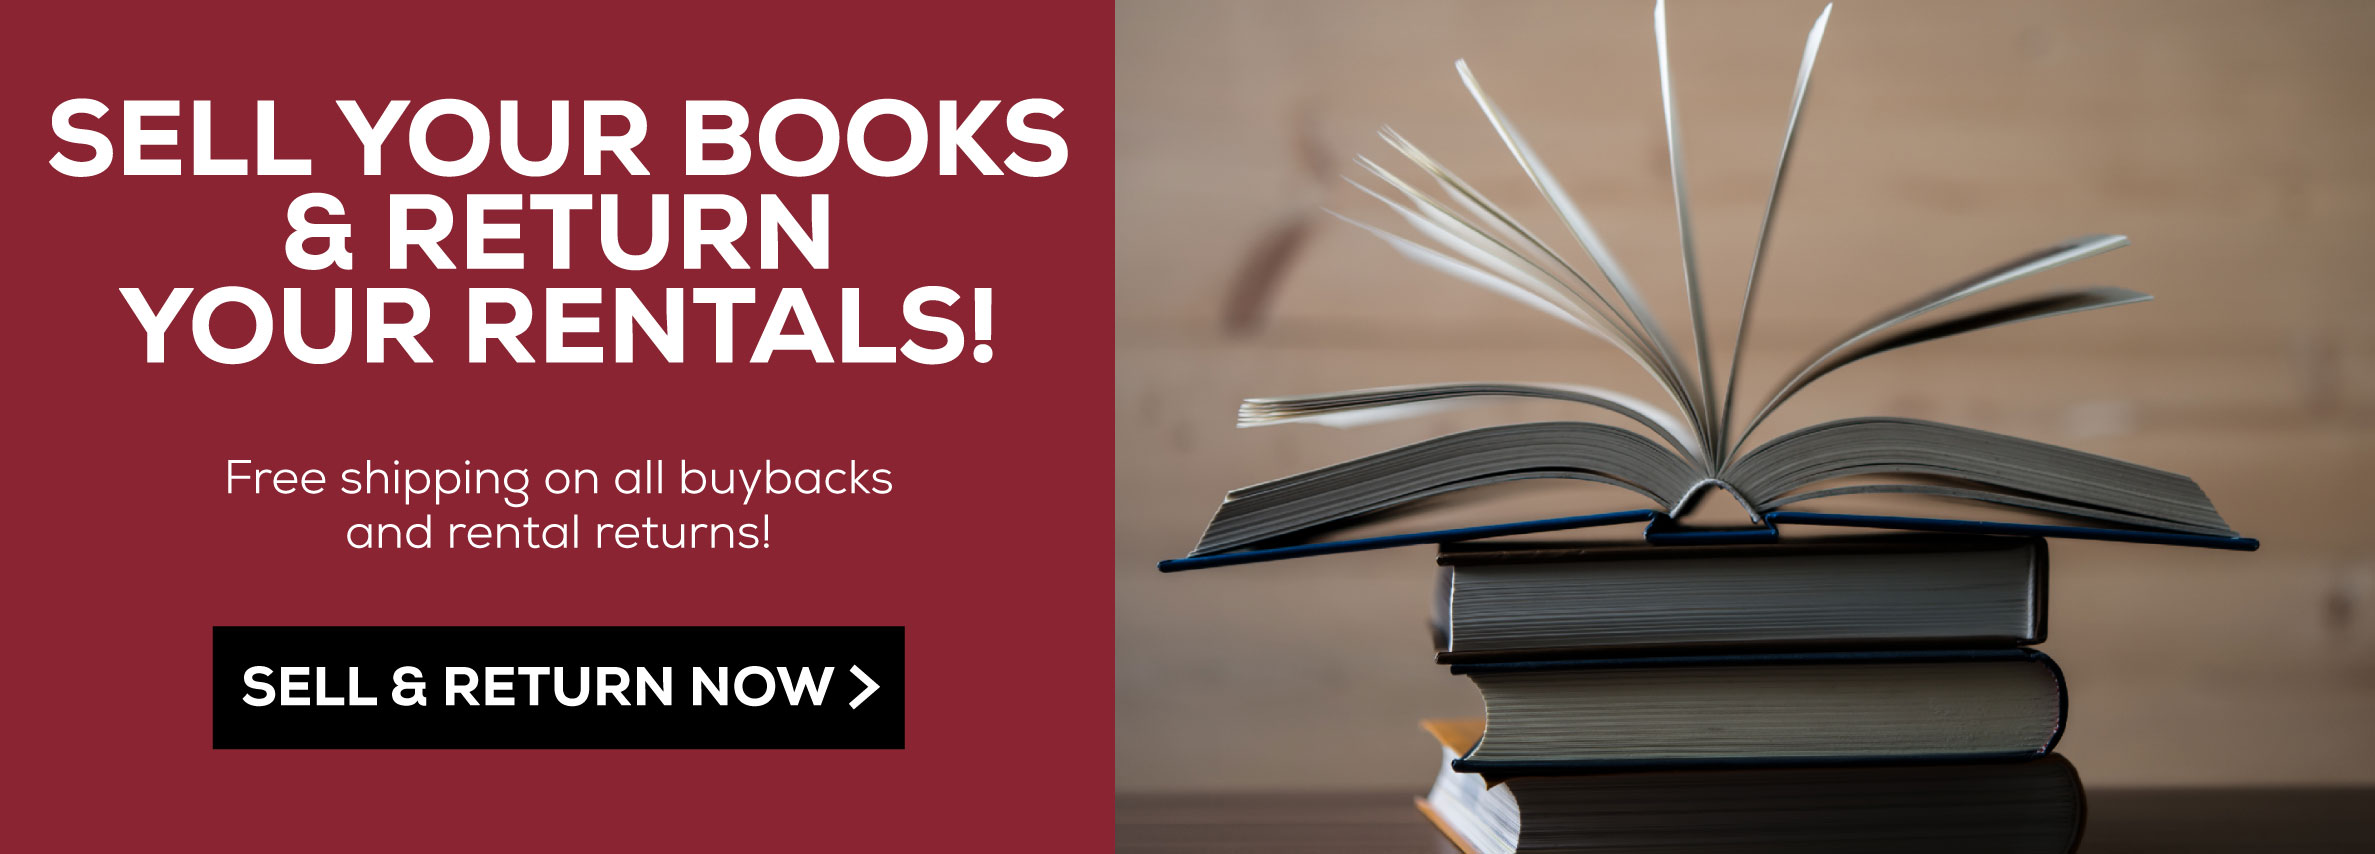 Sell Your Books and Return Your Rentals! Free Shipping on all Buybacks and Rental Returns. Sell and Return Now